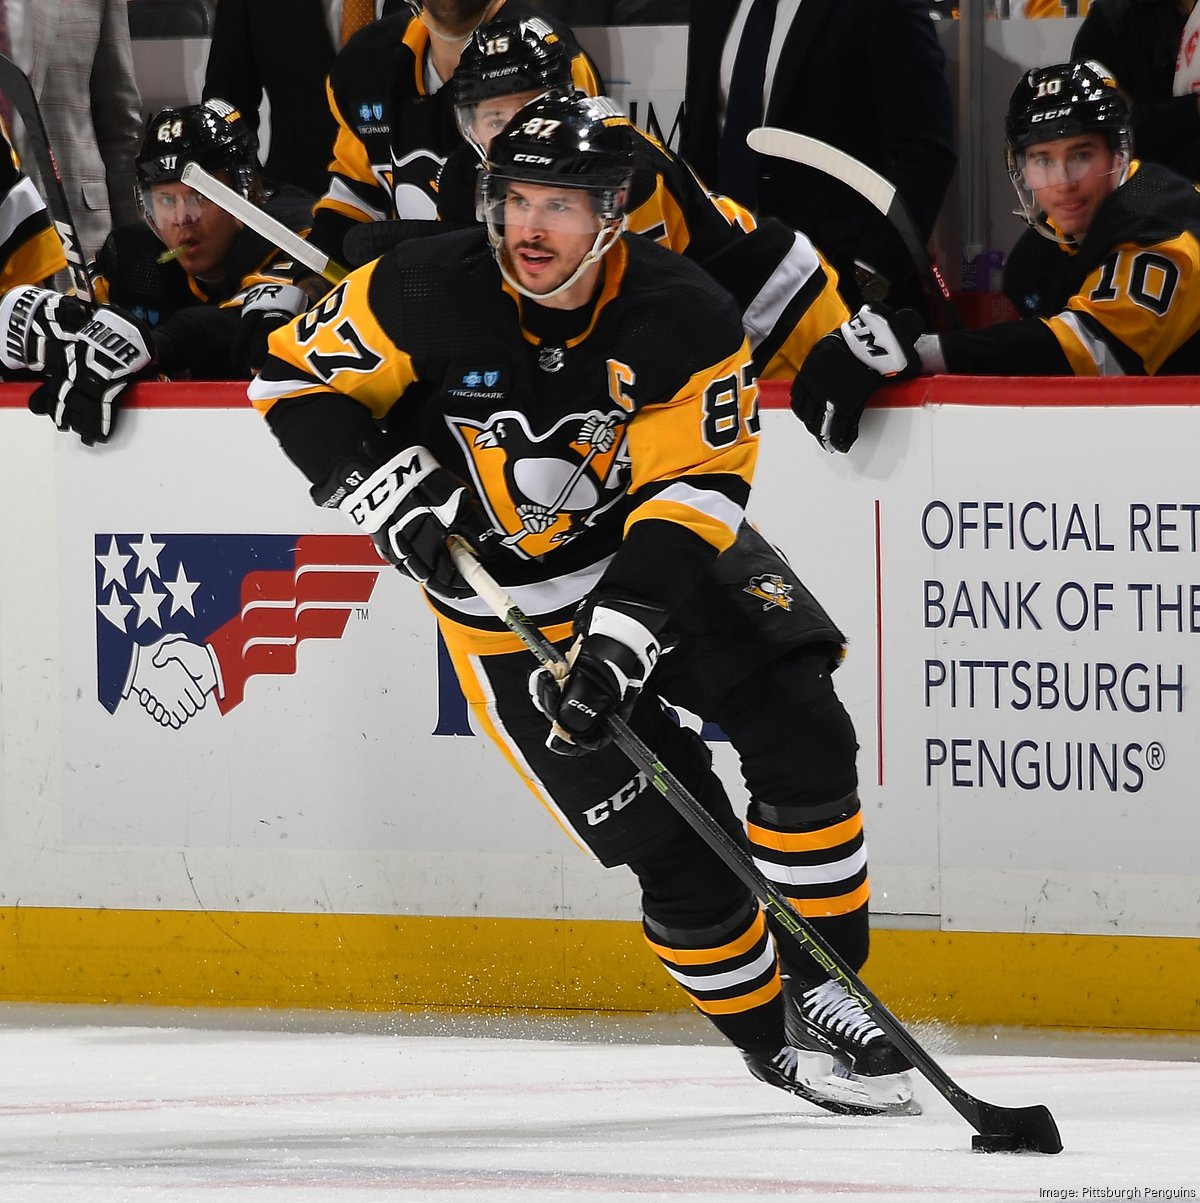 Penguins Karlsson top paid on team, Steelers top list of Pittsburgh  athletes along with Pirates - Pittsburgh Business Times